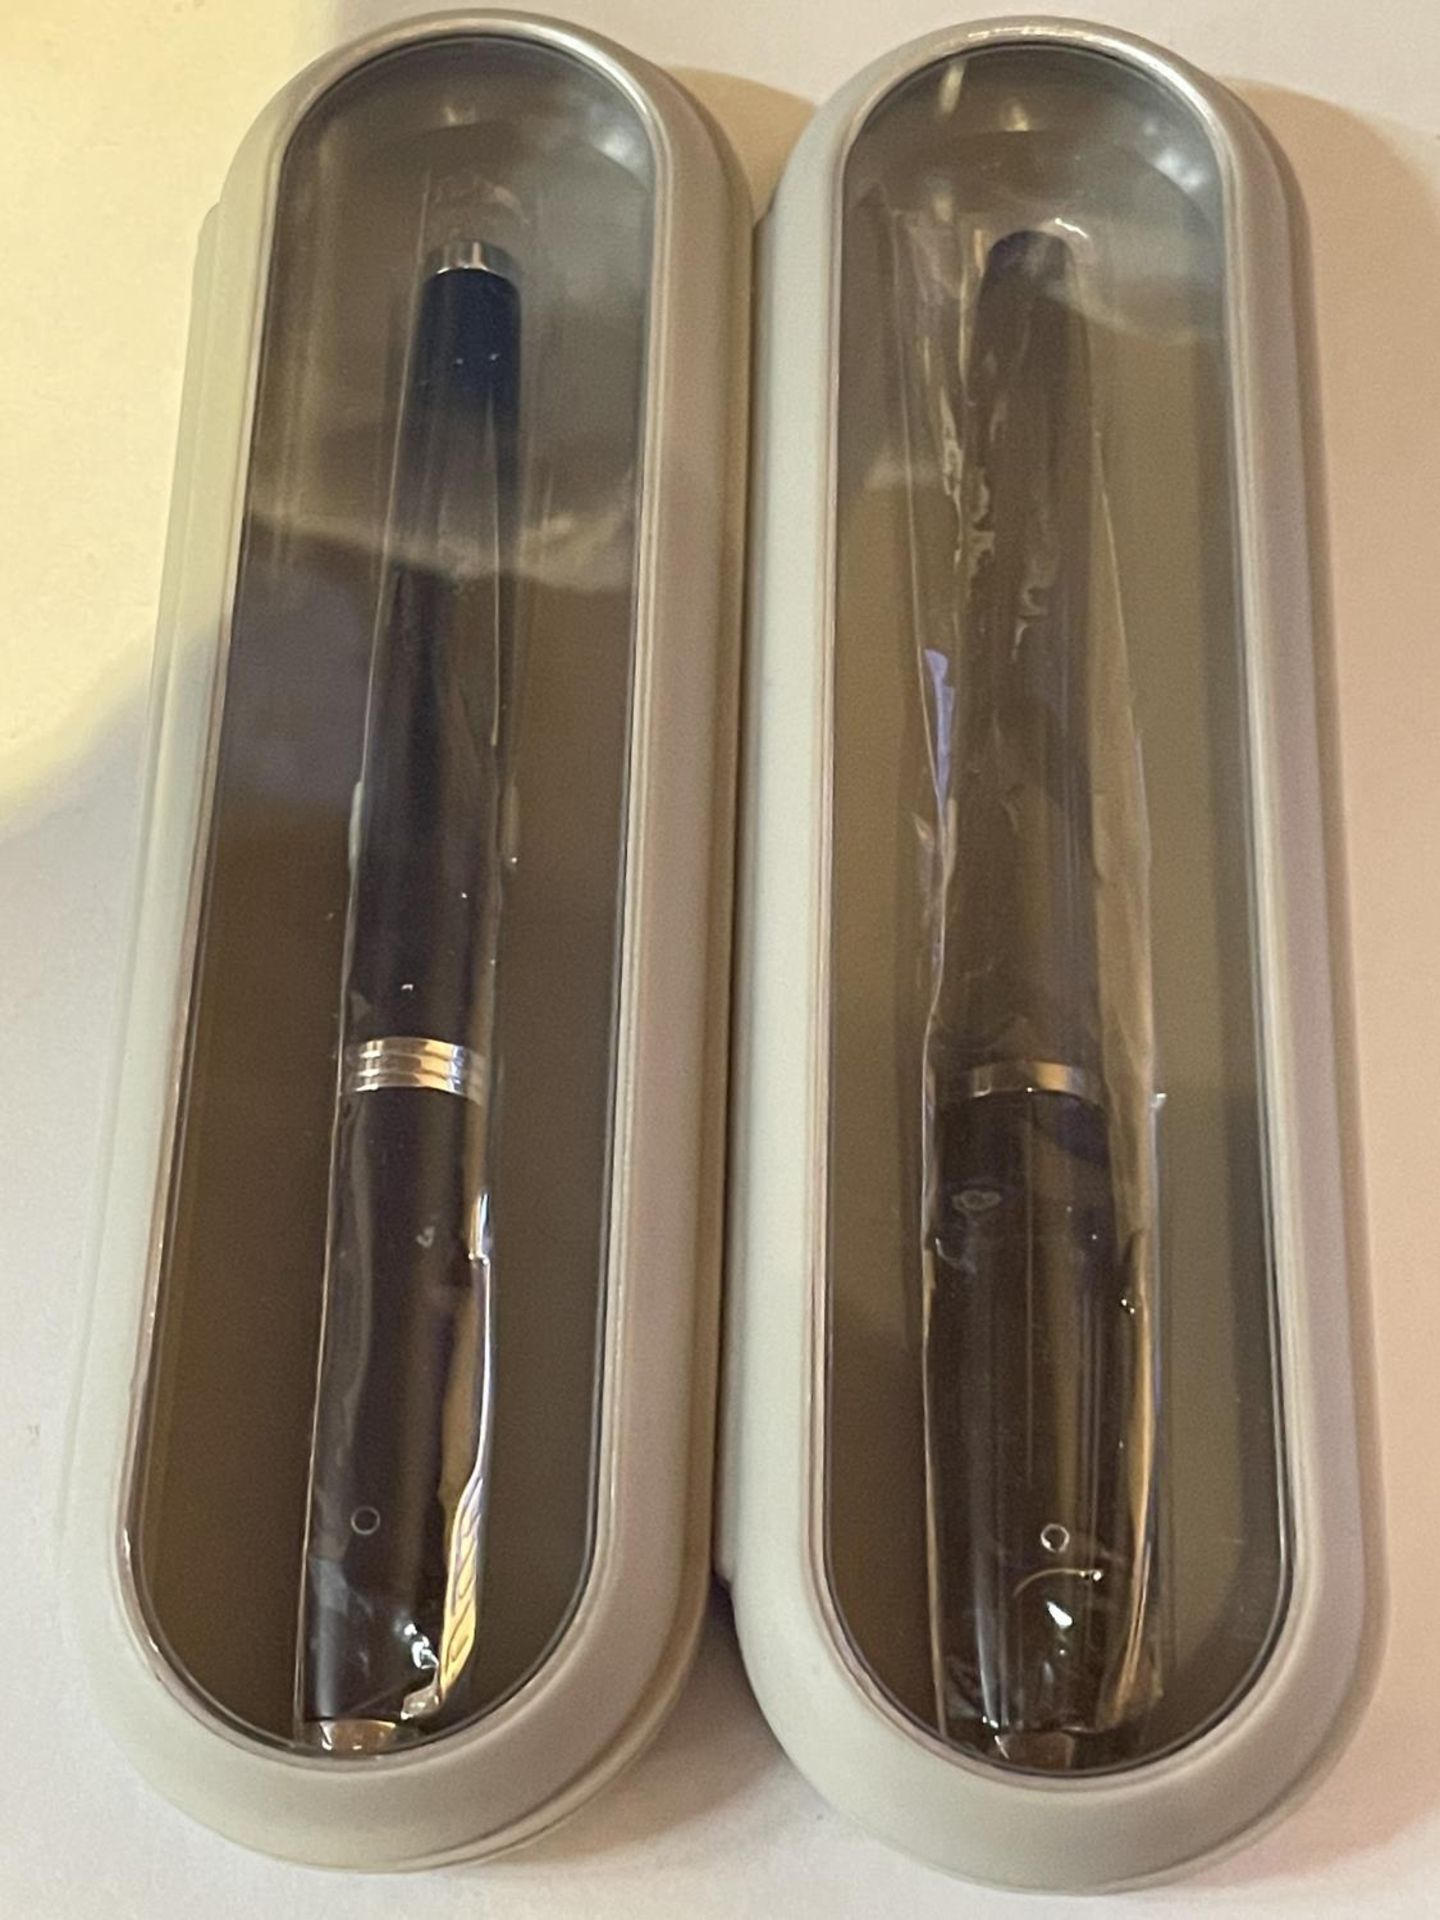 TWO NEW AND BOXED PARKER FOUNTAIN PENS ONE MATT BLUE IM SERIES WITH FINE NIB AND ONE BLACK FORSET